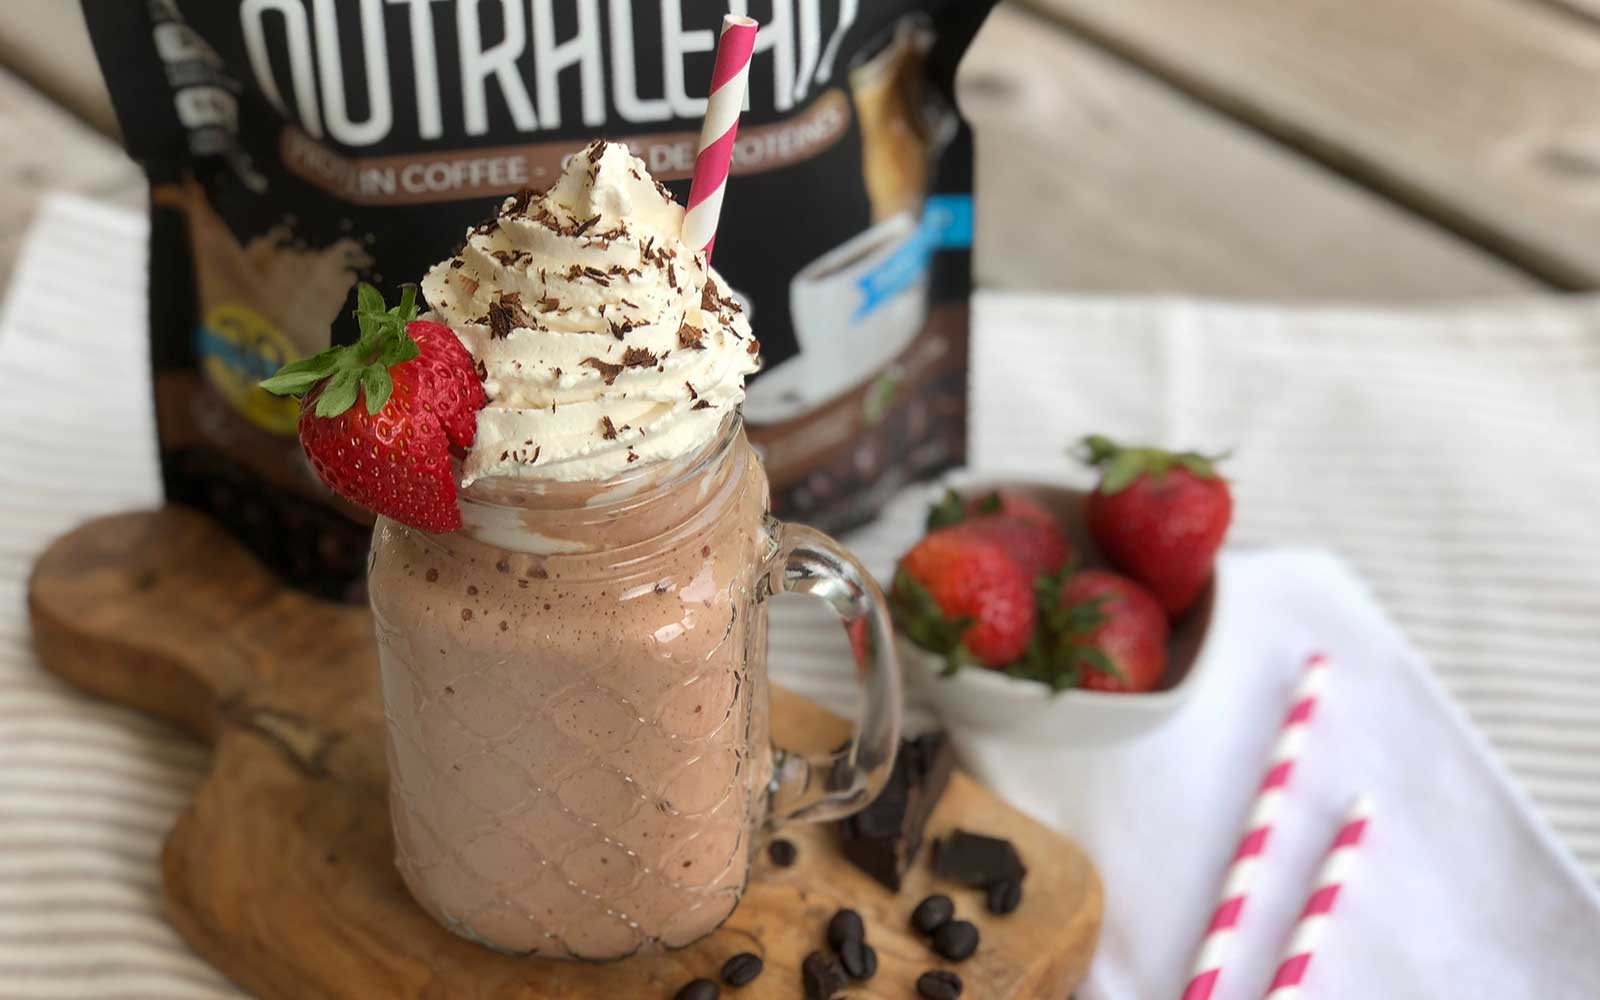 Strawberry Mocha Smoothie - Nutracelle